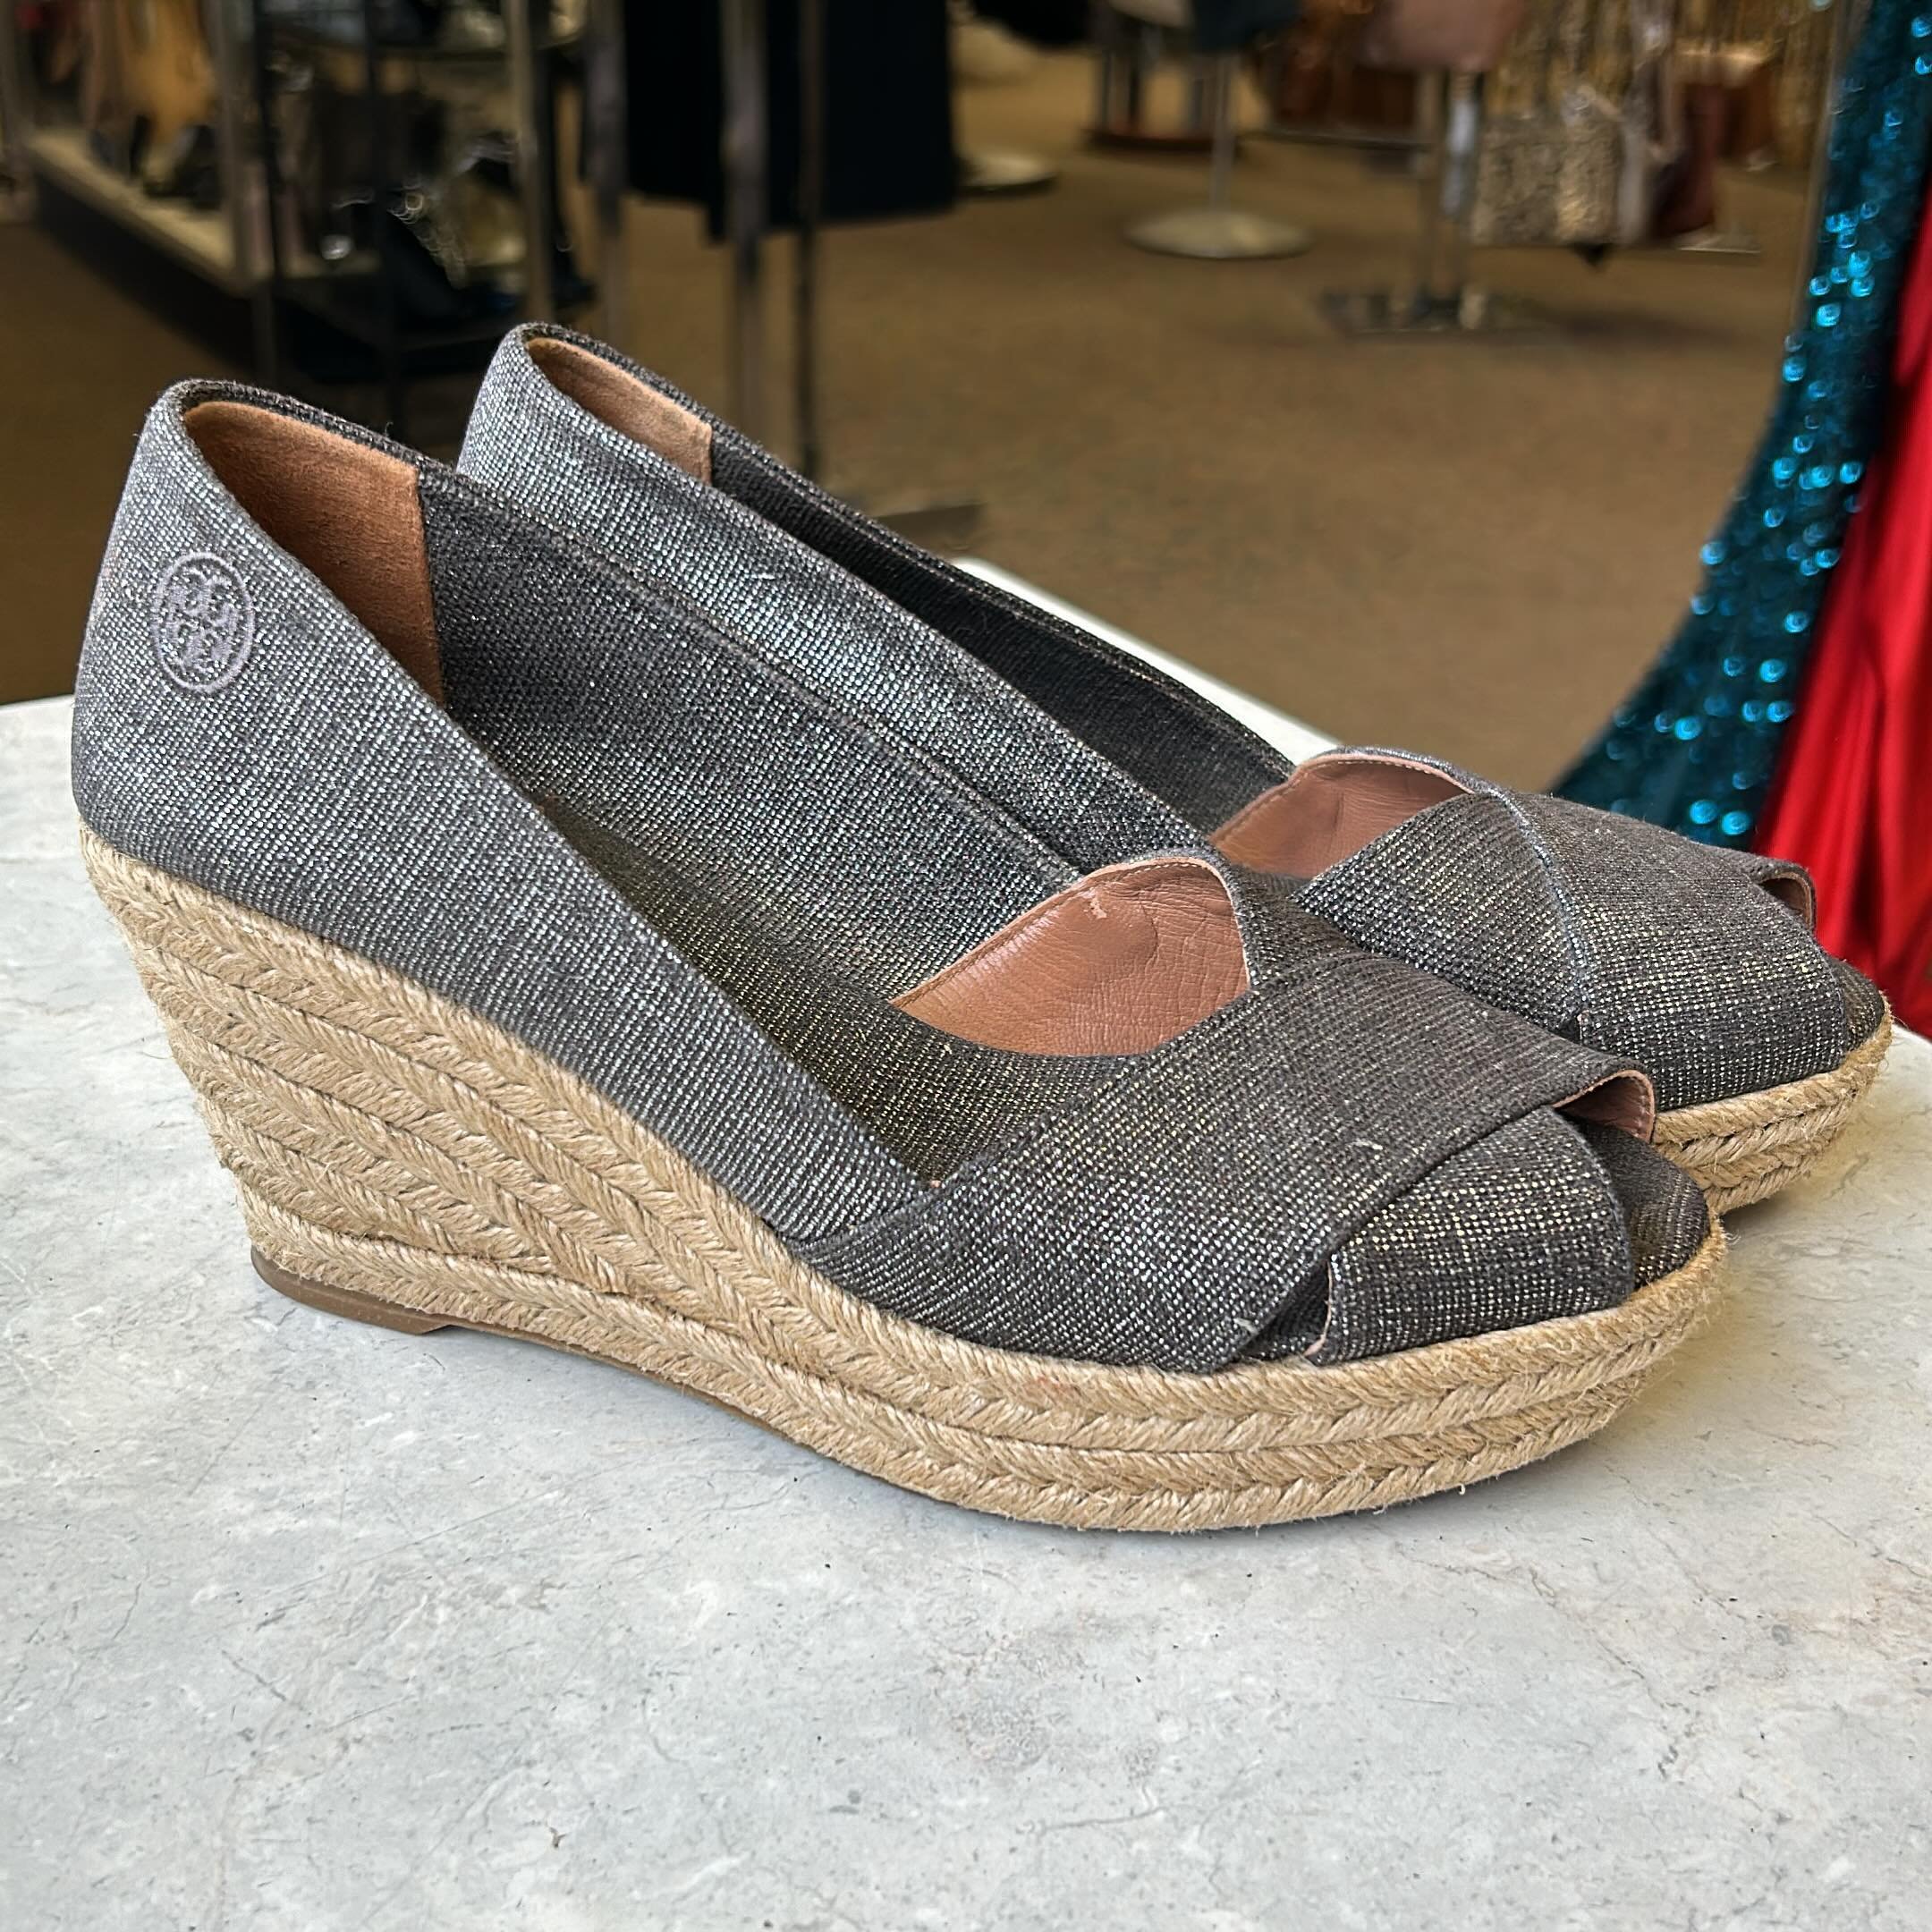 Tory Burch wedges size 8, $42.95! ❤️